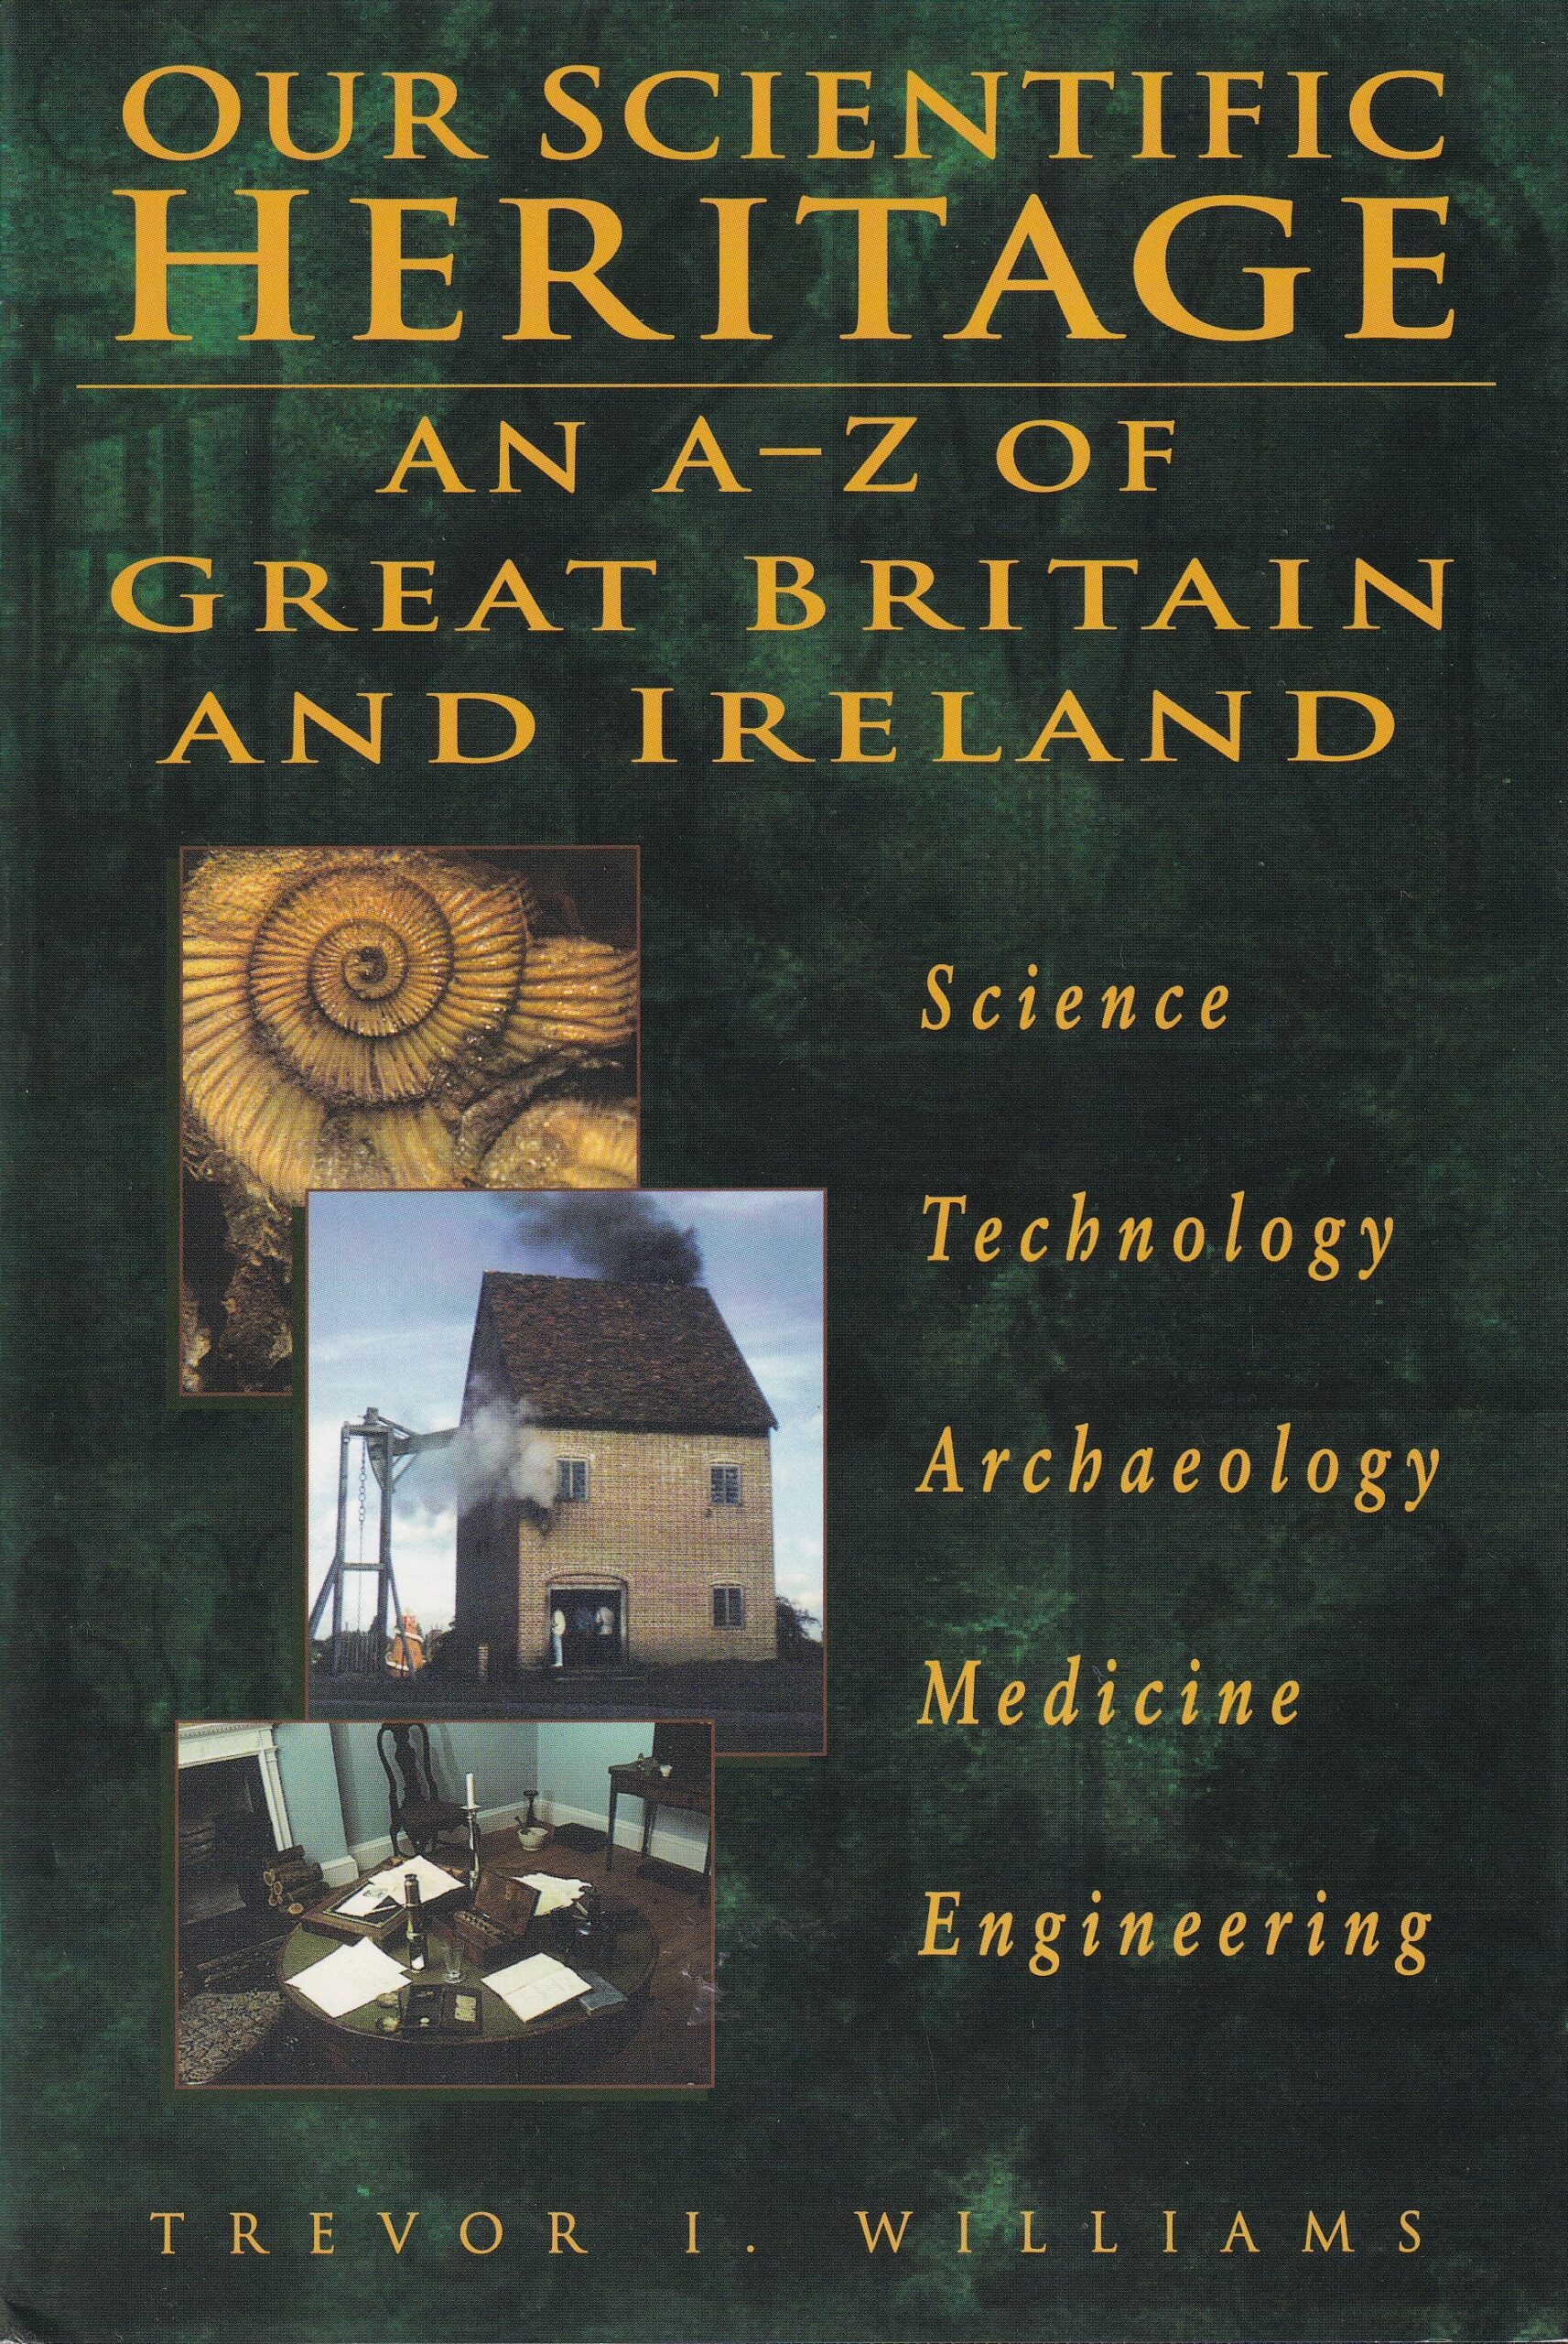 Our Scientific Heritage: An A-Z of Great Britain and Ireland | Trevor I. Williams | Charlie Byrne's